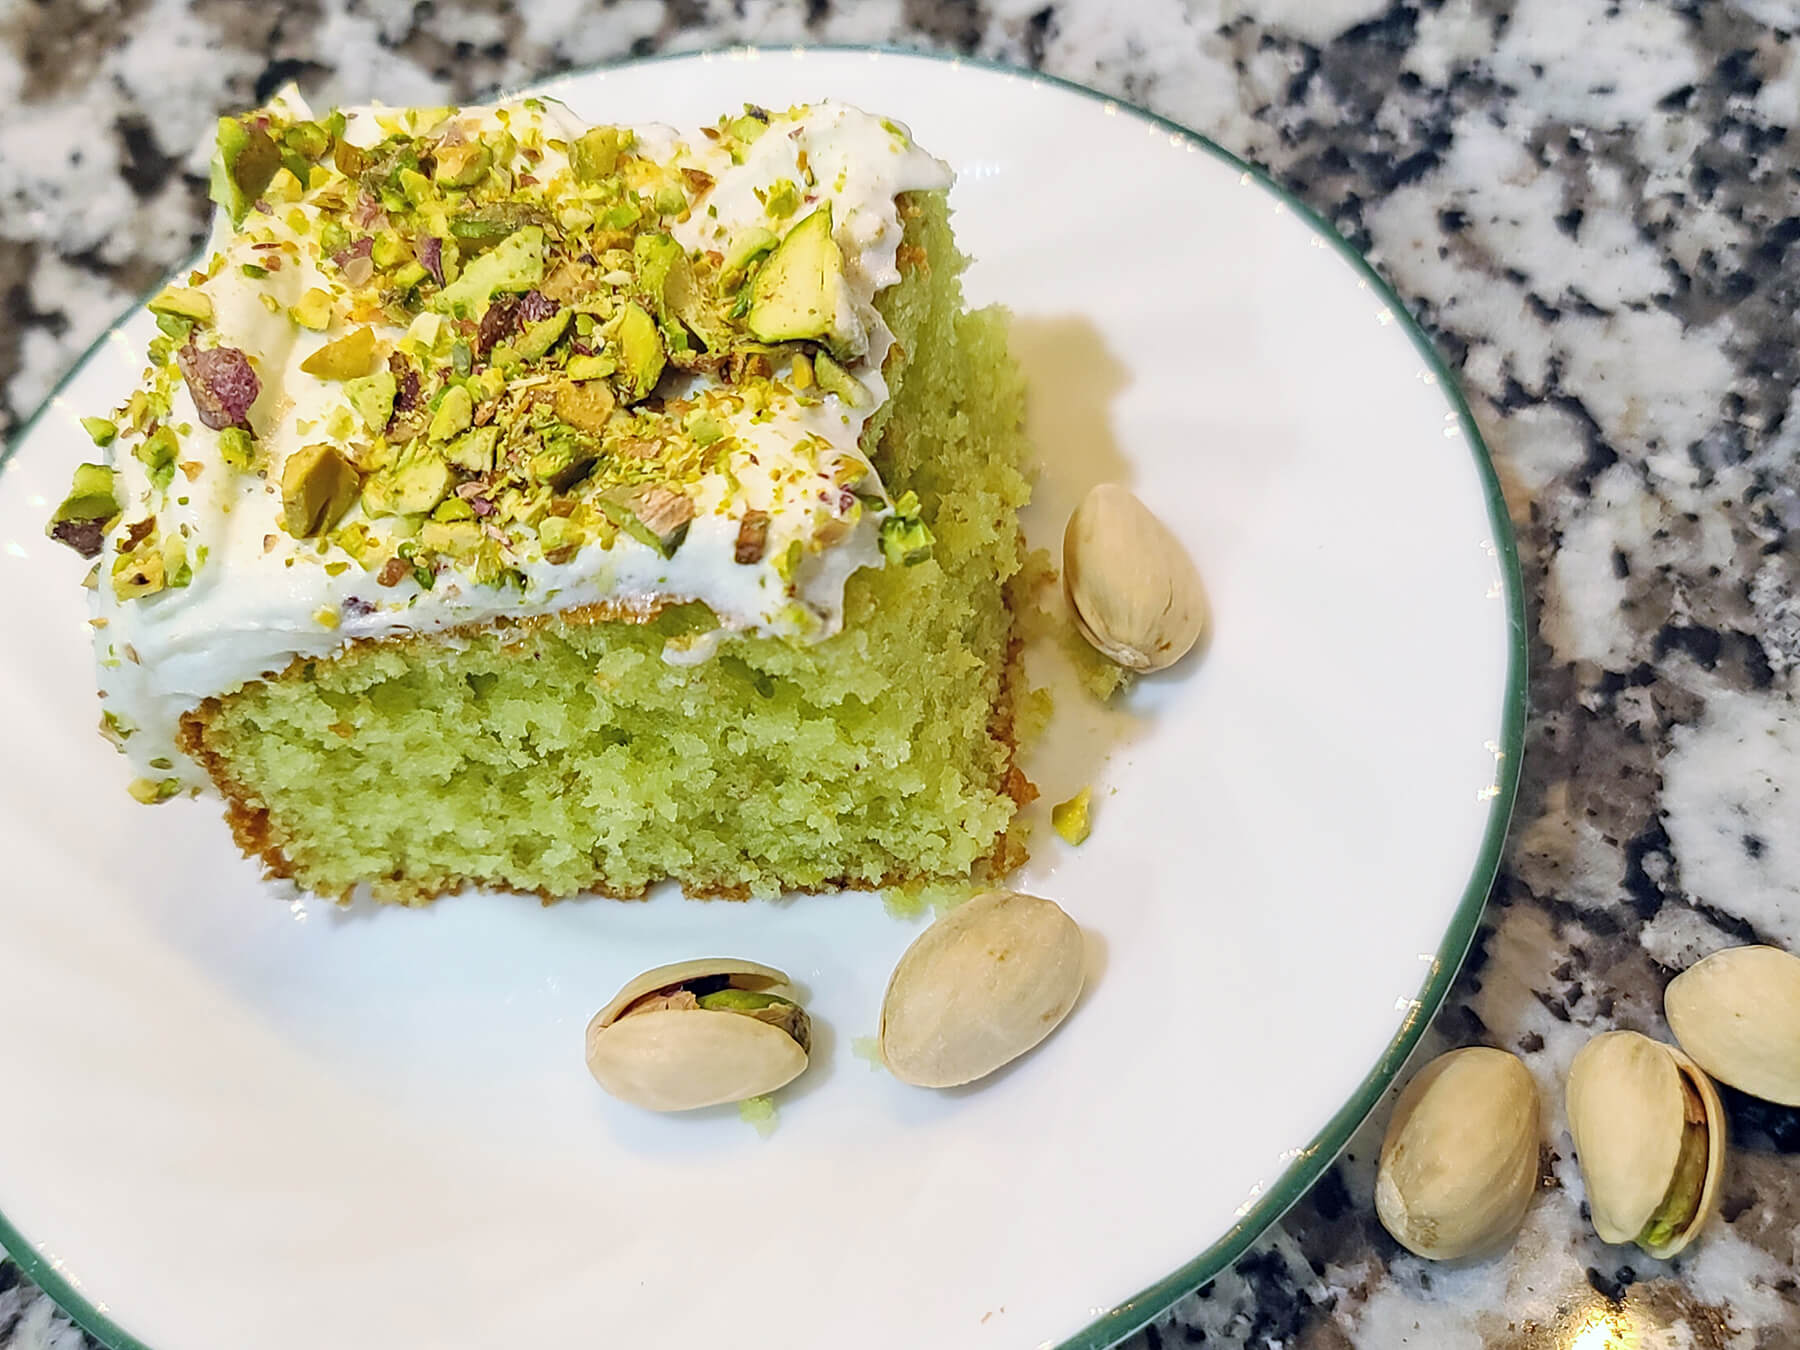 Lemon-Frosted Pistachio Cake Recipe - NYT Cooking